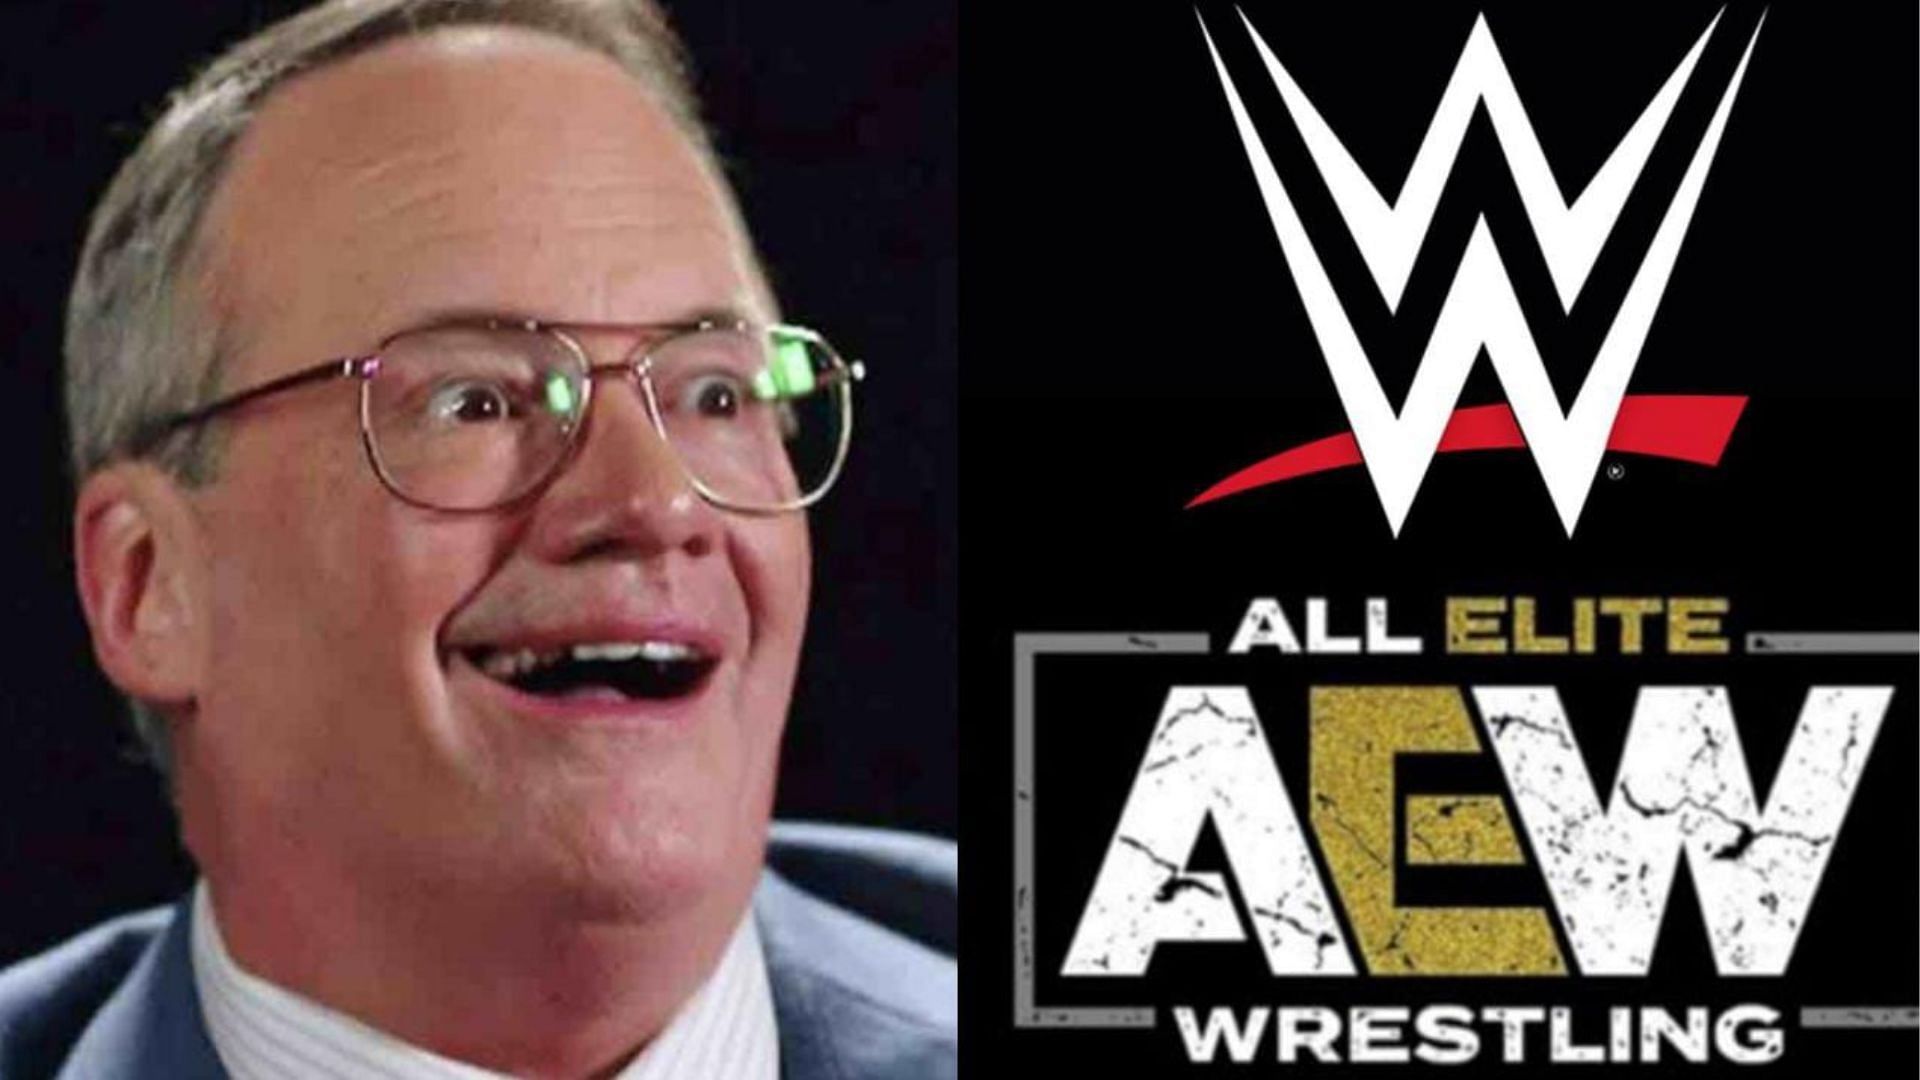 Jim Cornette has weighed in on a current AEW storyline